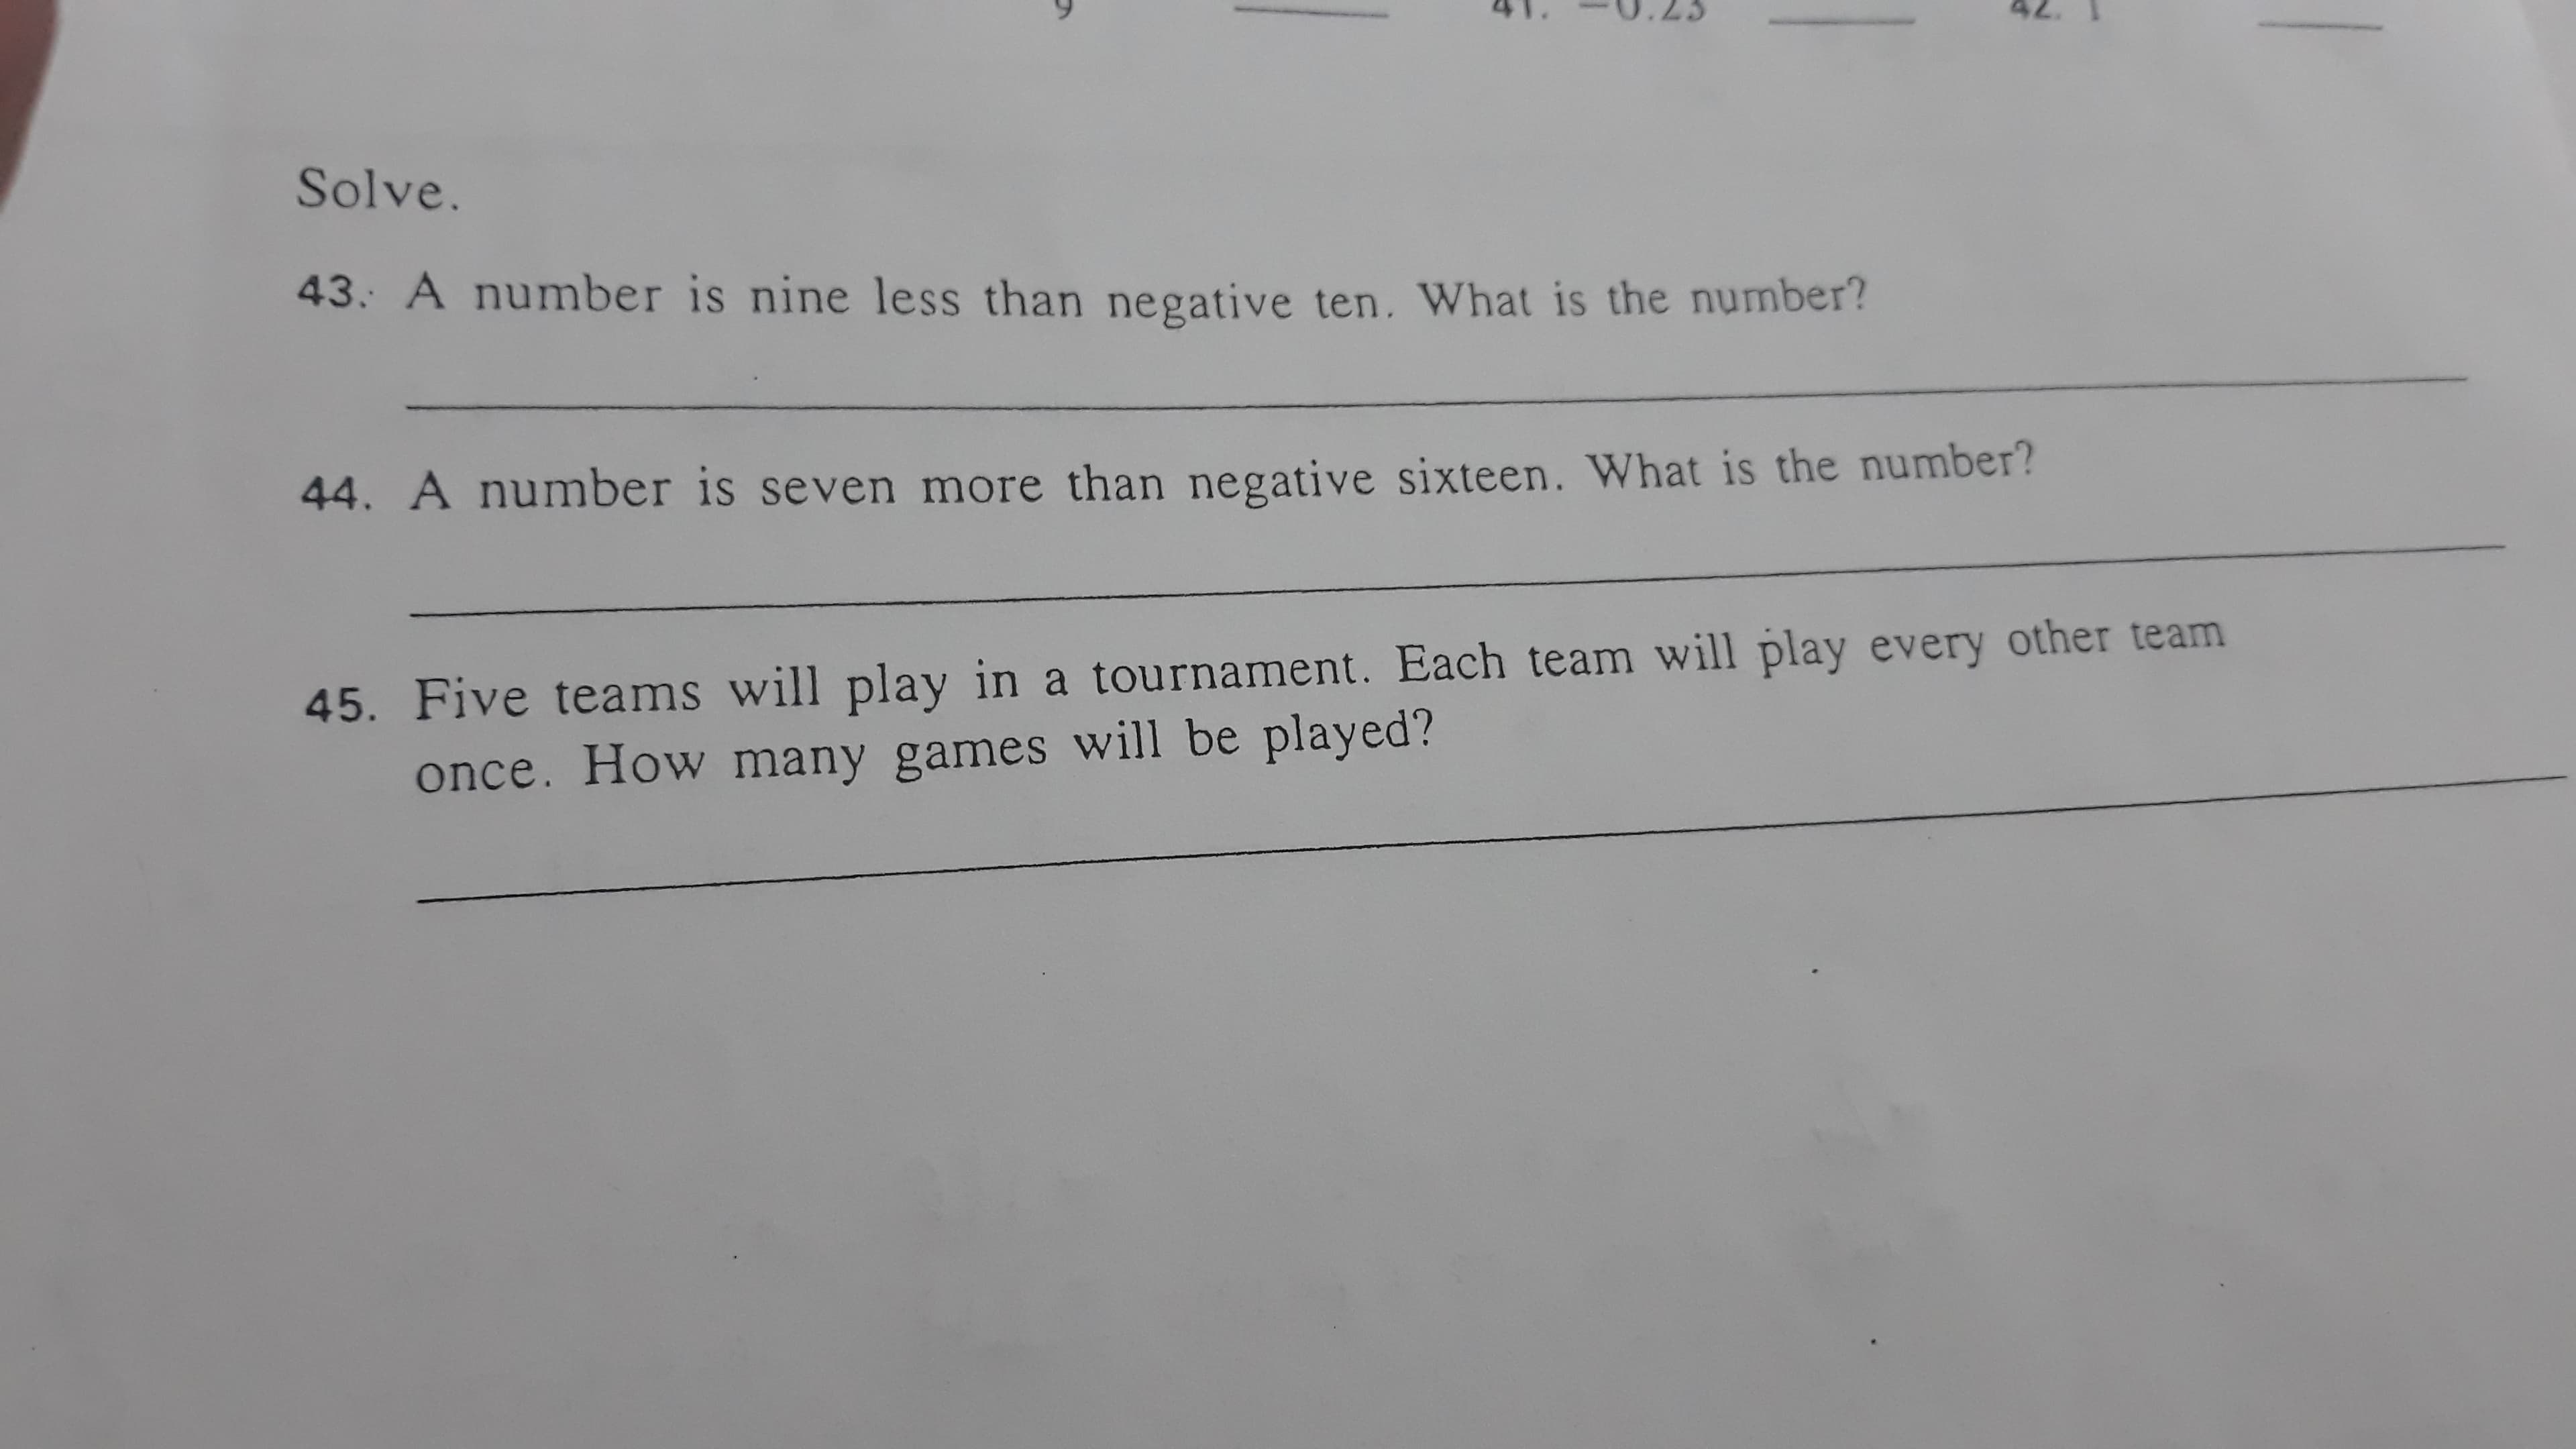 A number is nine less than negative ten. What is the number?
